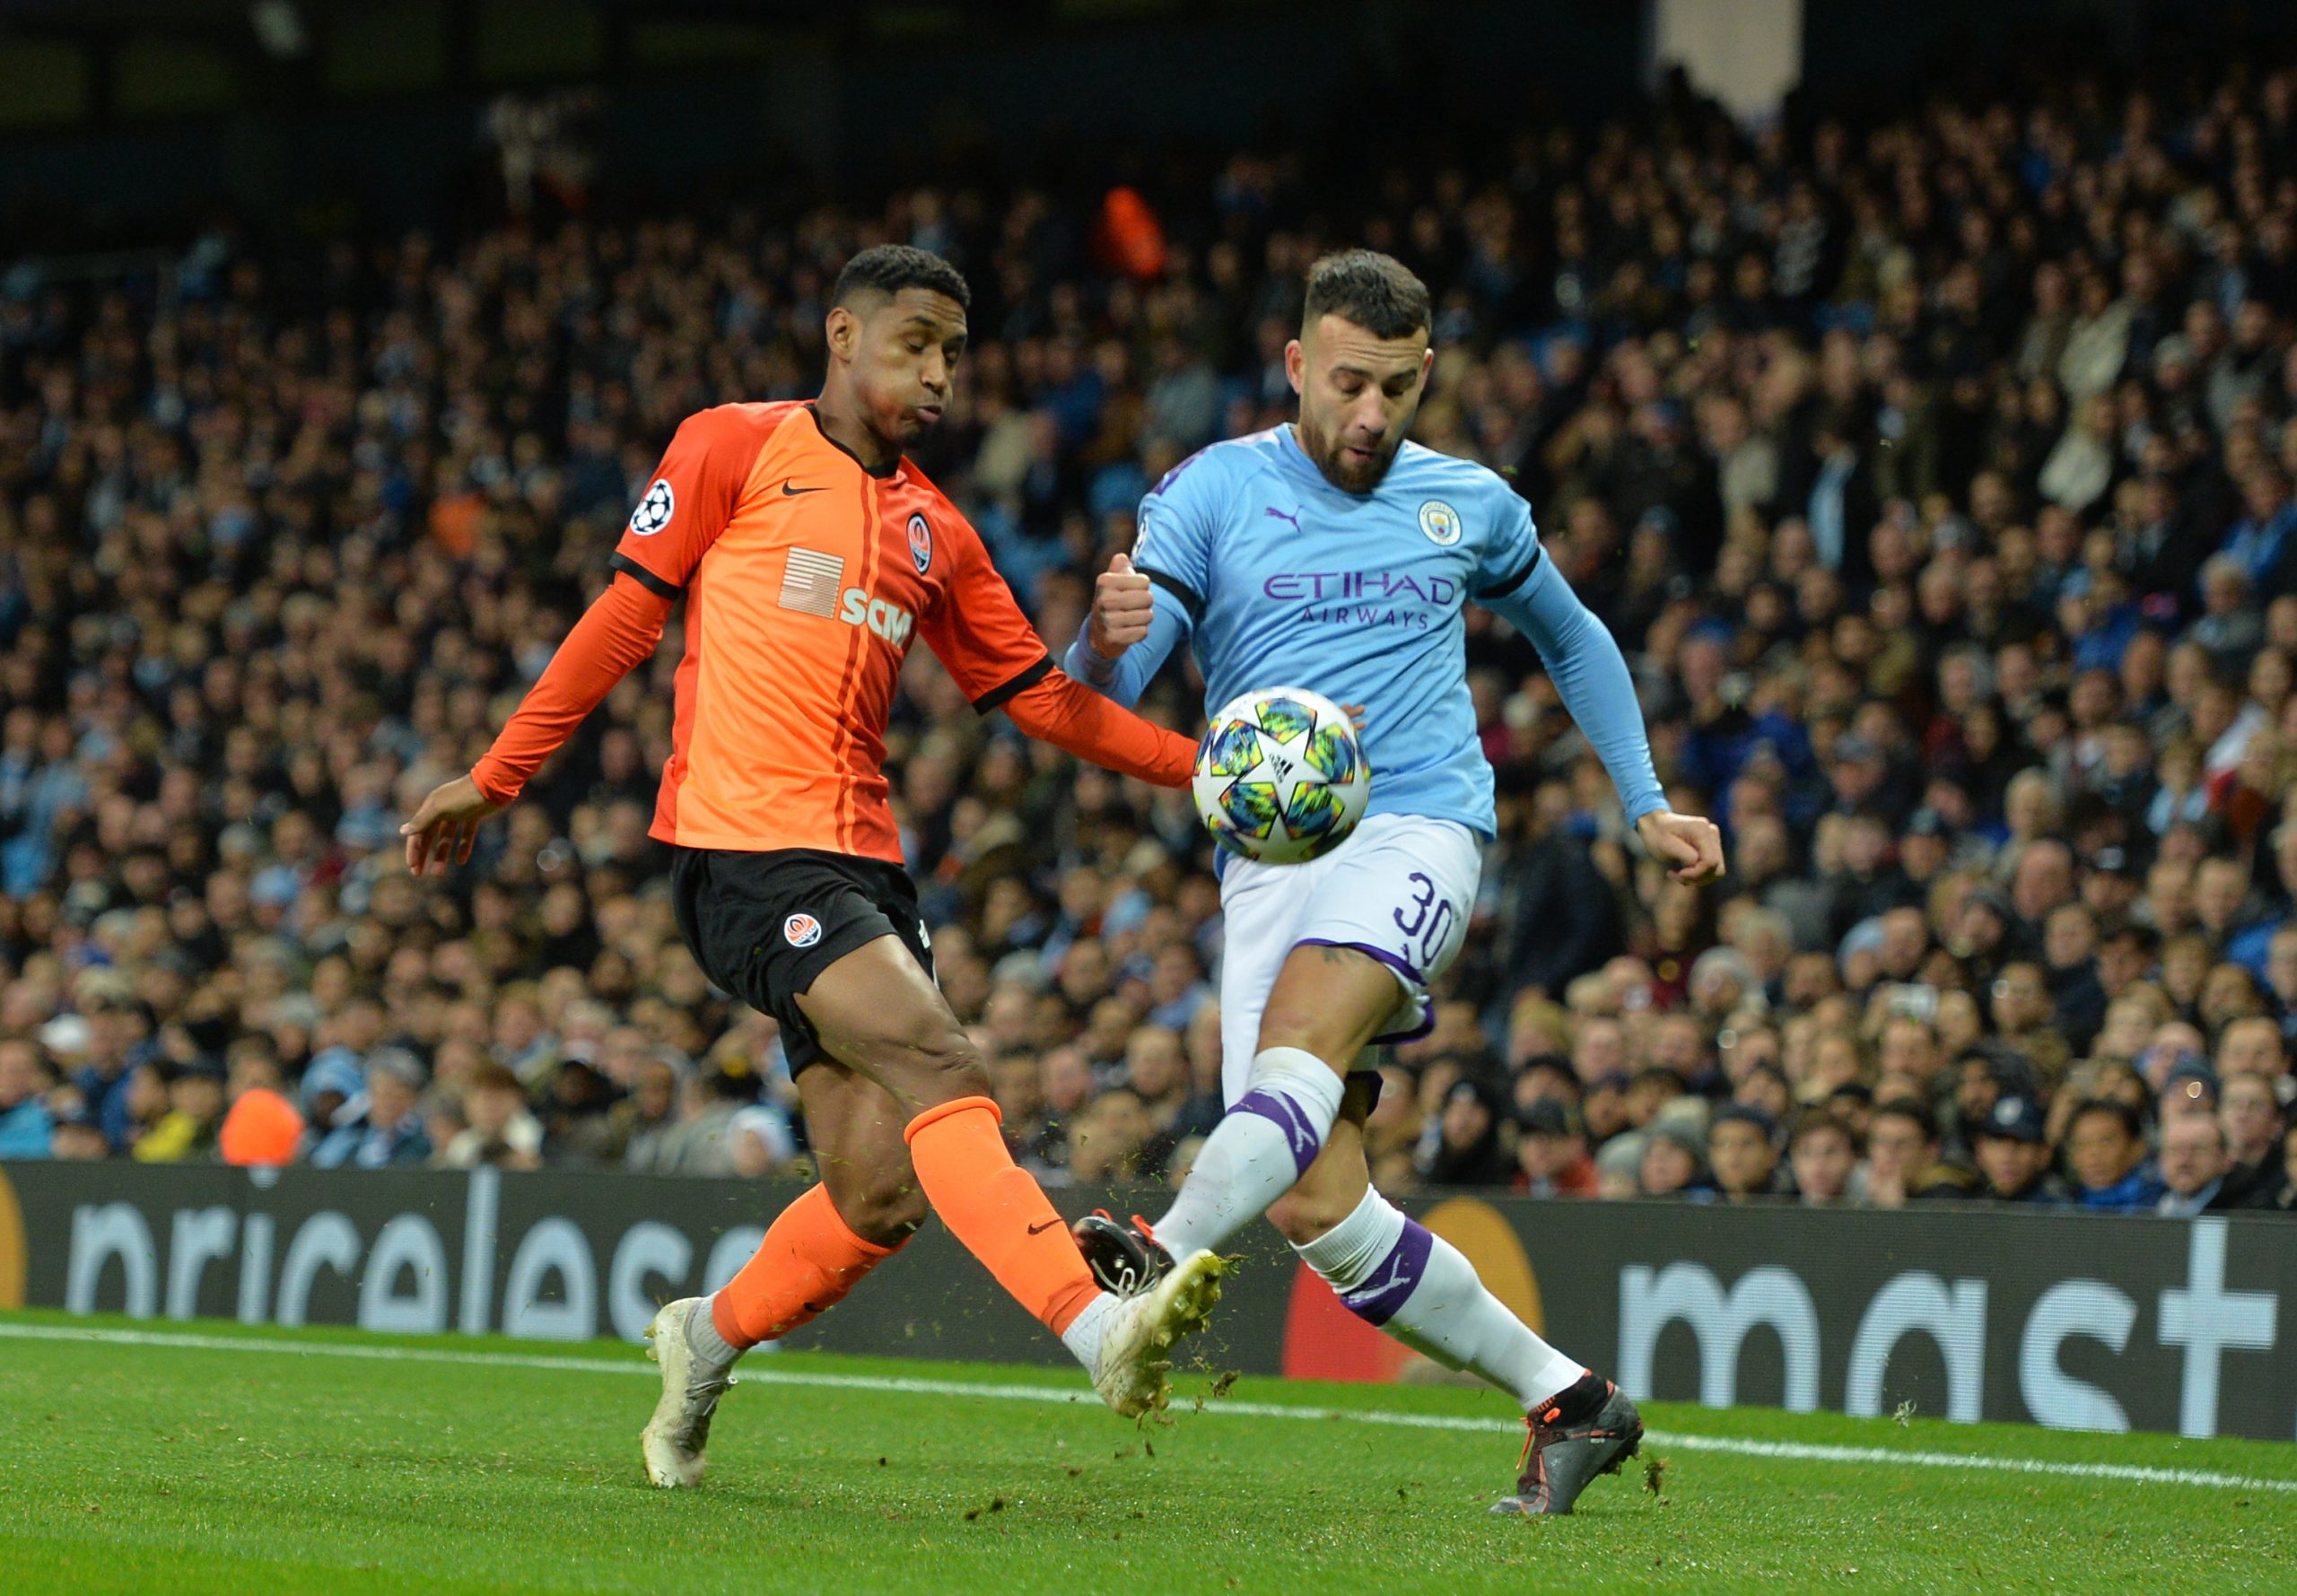 epa08027597 Shakhtar Donetsk's Tete (L) in action against Manchester City's Nicolas Otamendi  (R) during the UEFA Champions League group C soccer match between Manchester City and Shakhtar Donetsk at the Etihad Stadium in Manchester, Britain, 26 November 2019.  EPA/PETER POWELL